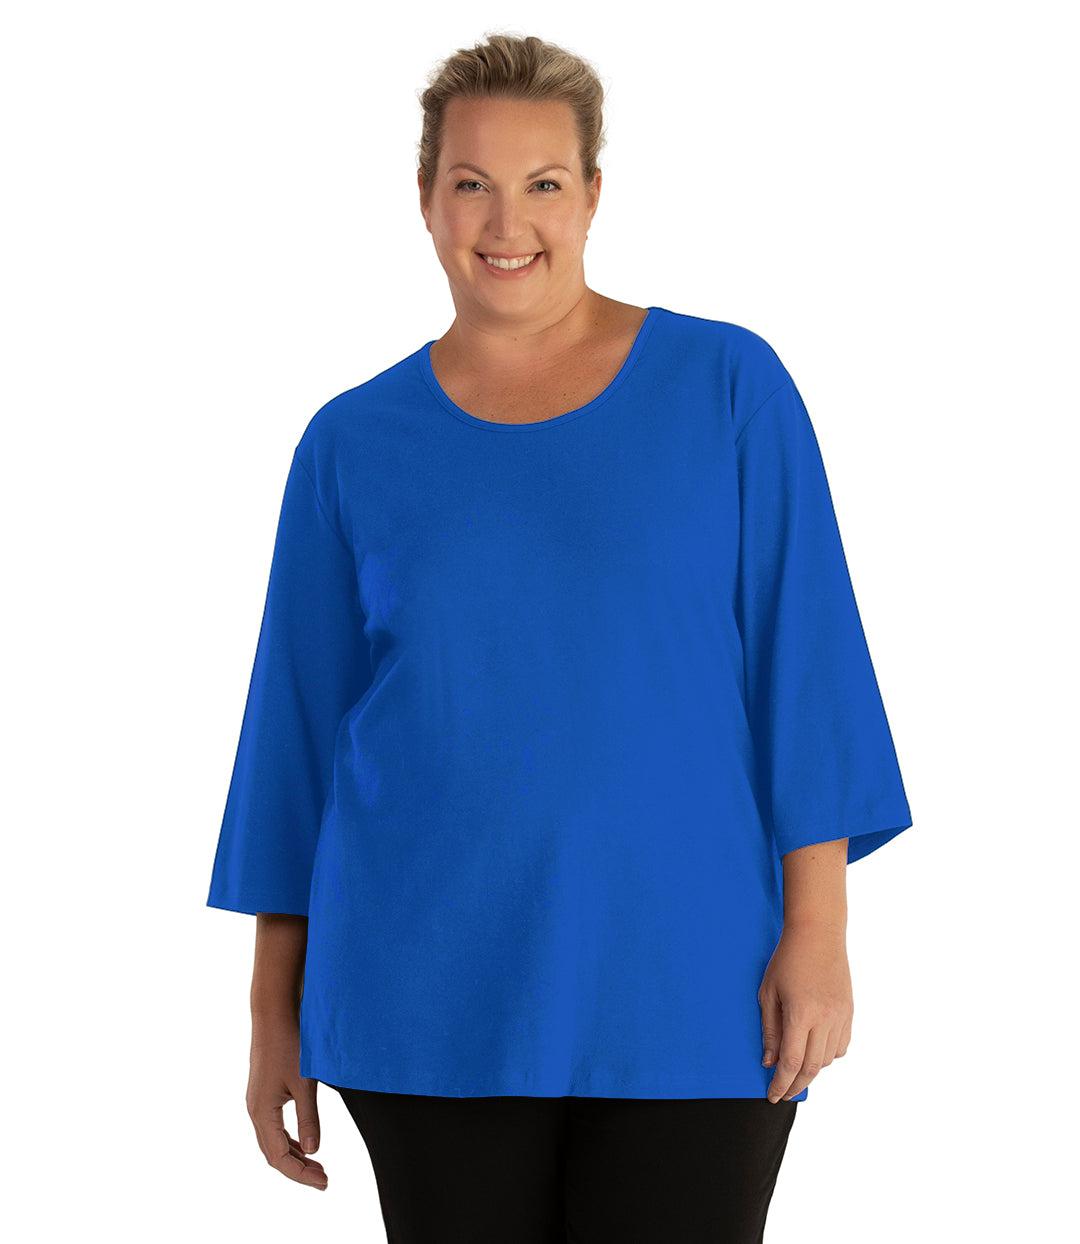 Plus size woman, facing front, wearing JunoActive plus size Stretch Naturals Scoop Neck ¾ Sleeve Top in the color Vivid Blue. She is wearing JunoActive Plus Size Leggings in the color Black.